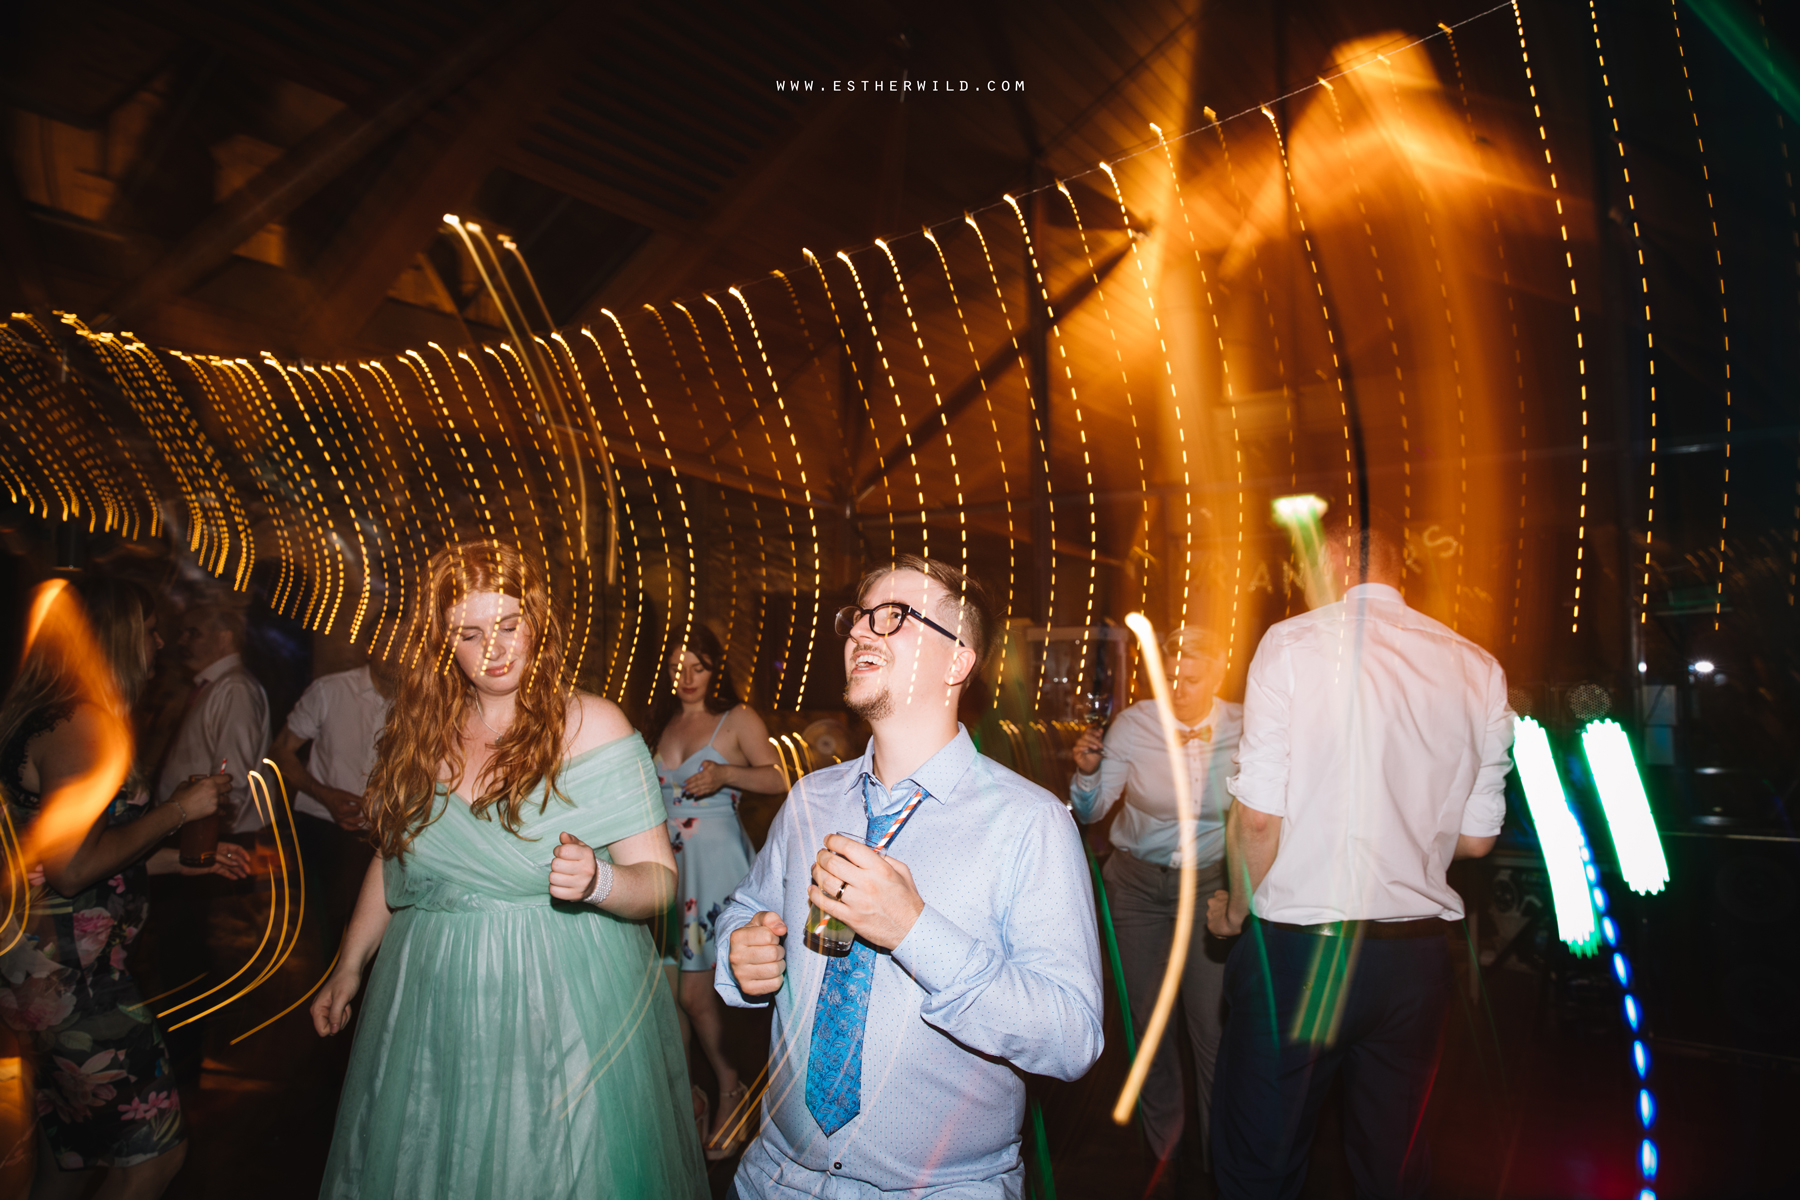 Norwich_Castle_Arcade_Grosvenor_Chip_Birdcage_Cathedral_Cloisters_Refectory_Wedding_Photography_Esther_Wild_Photographer_Norfolk_Kings_Lynn_3R8A3429.jpg